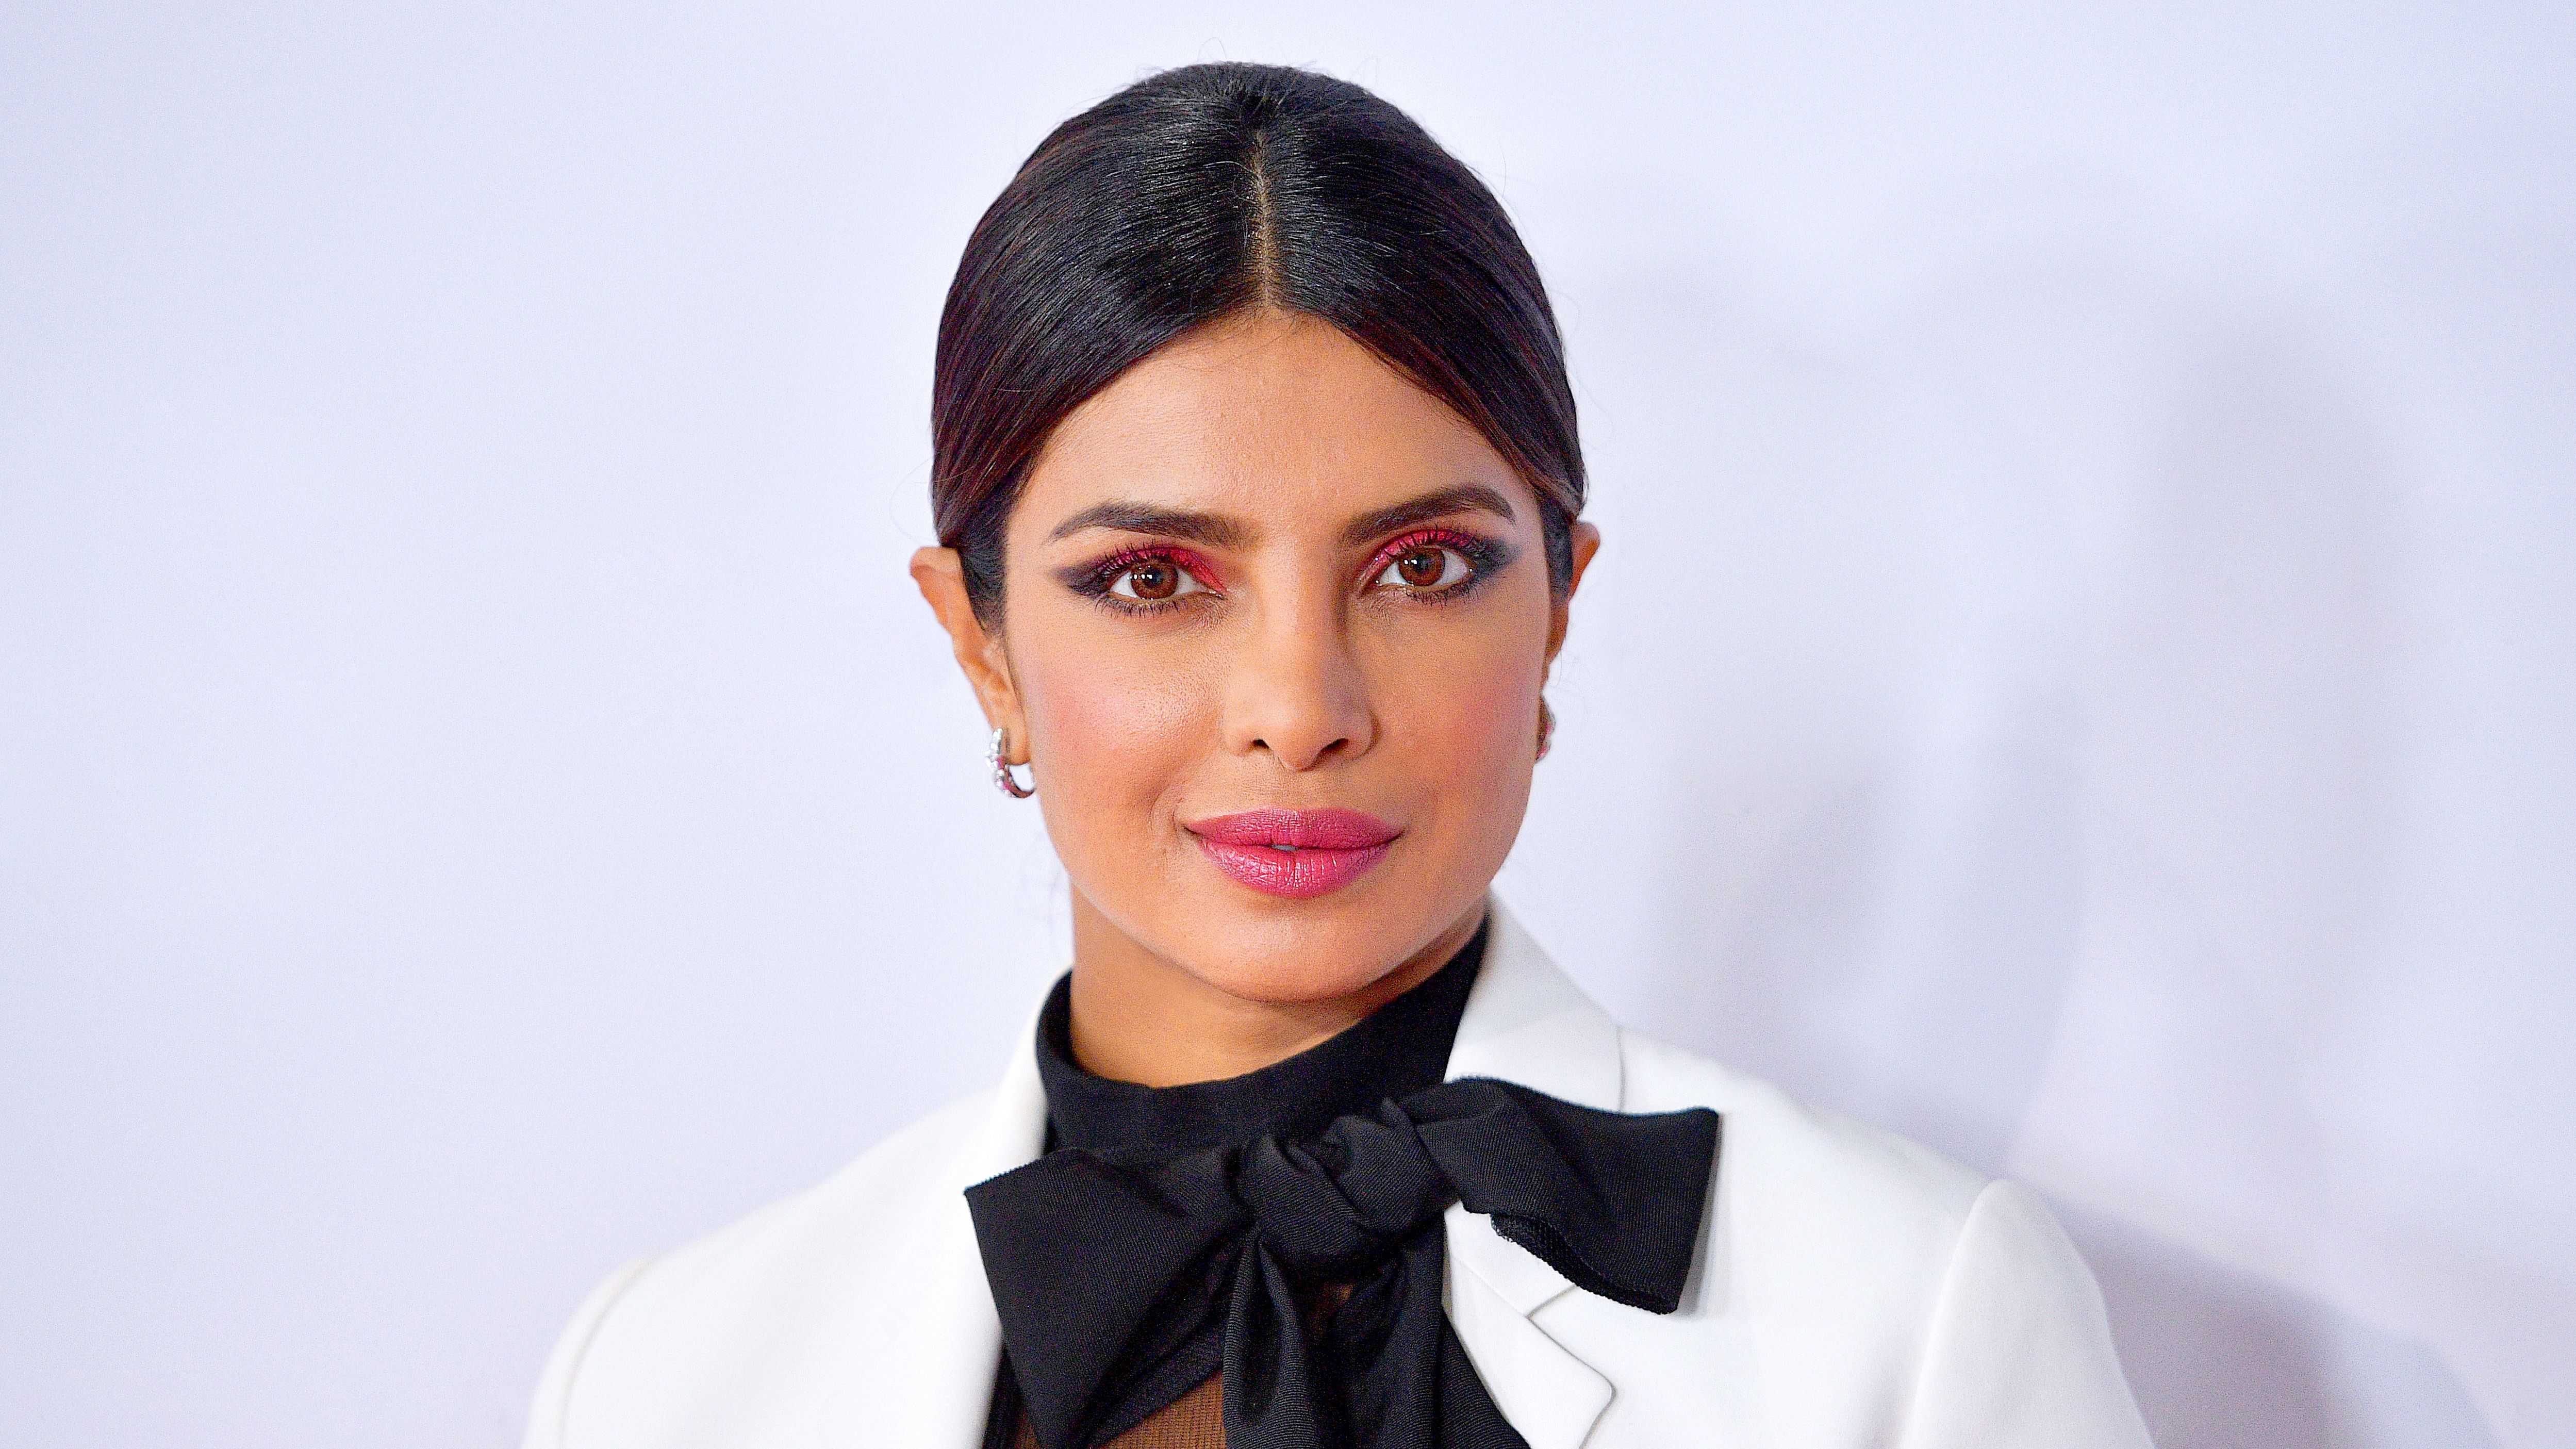 Daddys Lil Girl Porn - Priyanka Chopra Jonas's 'Unfinished' Book Cover & Details on the Memoir |  Marie Claire